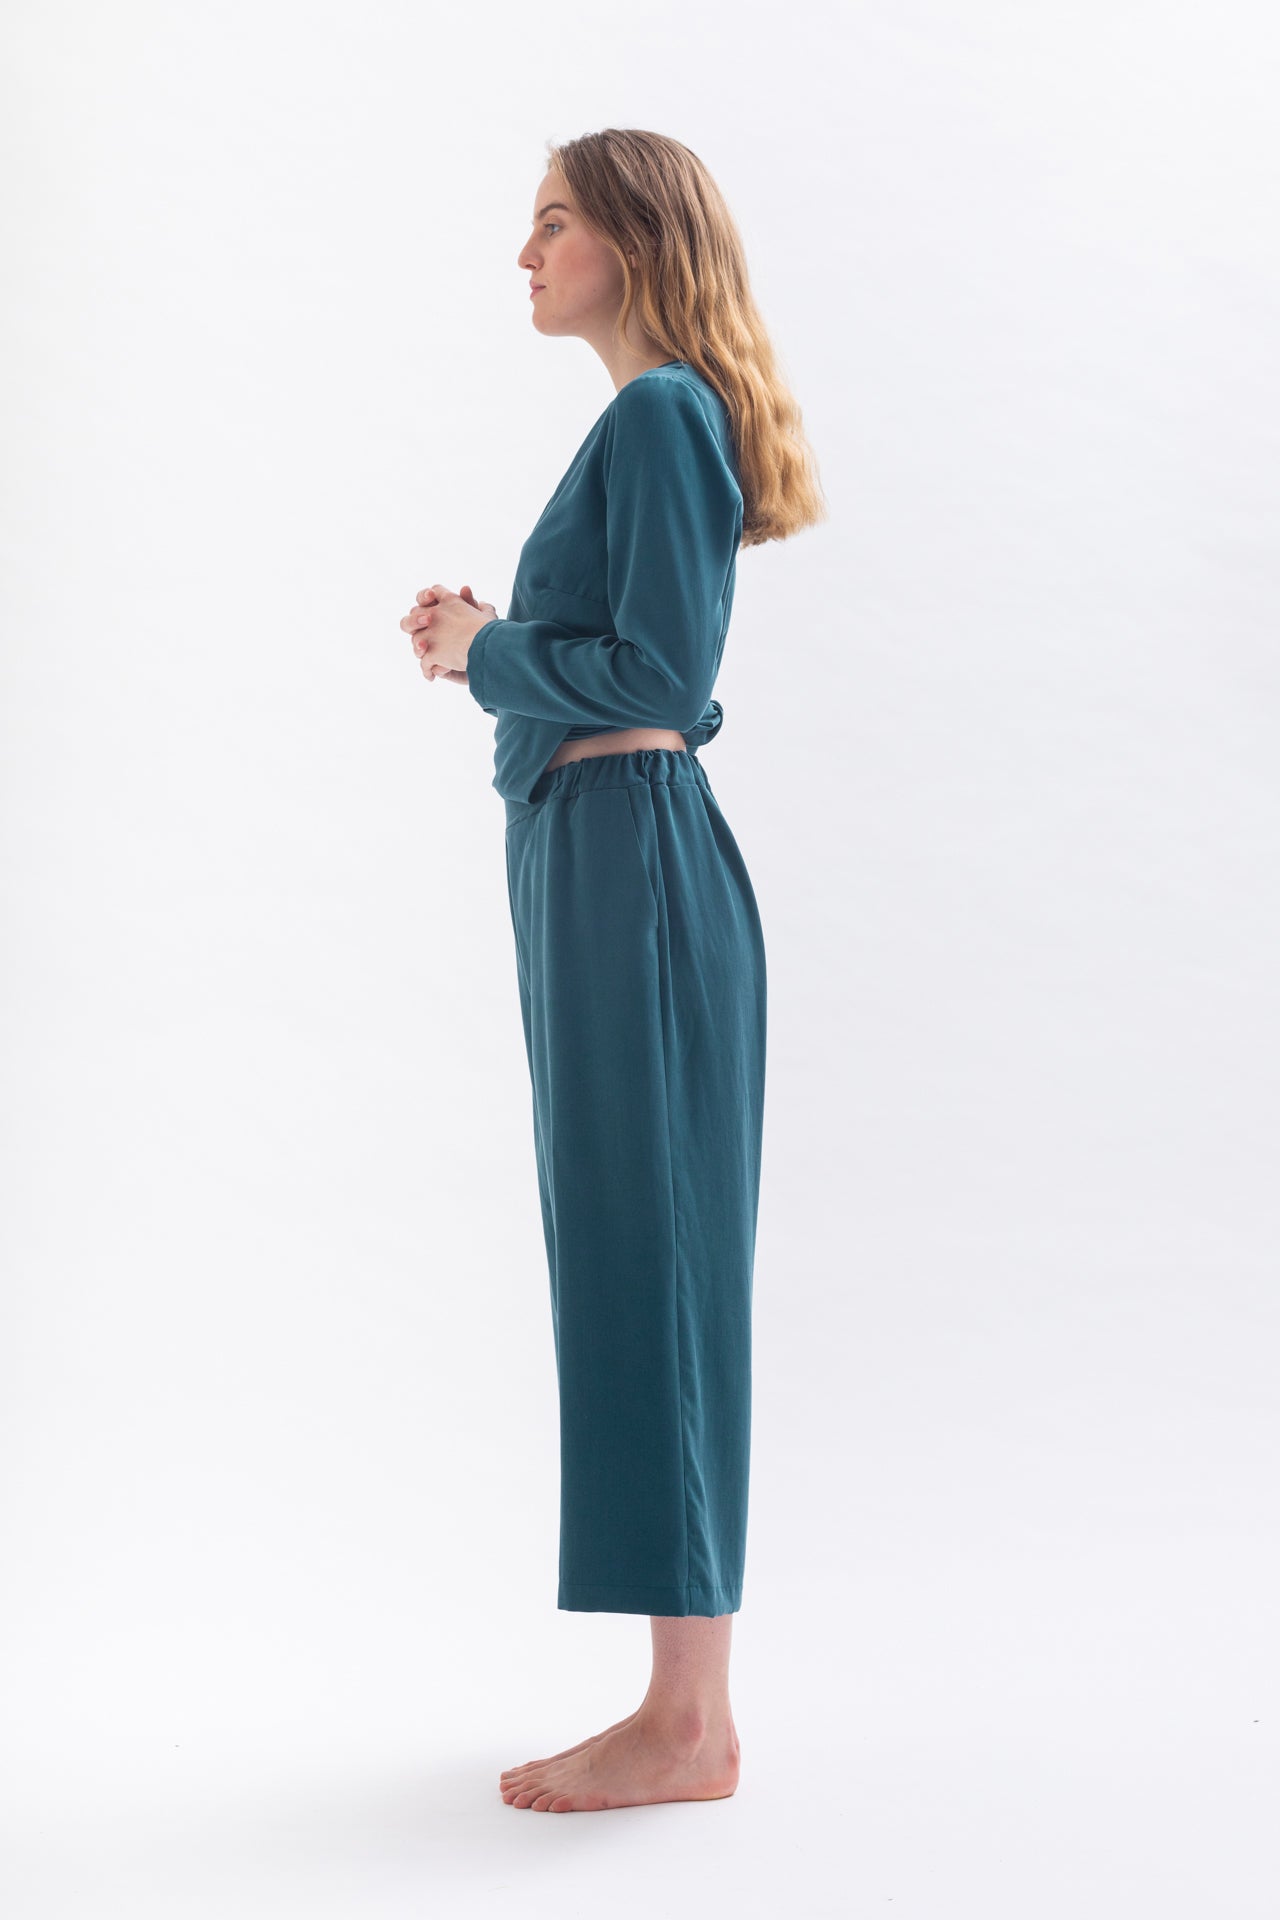 Culottes "THEE-KLA" in green made of Tencel